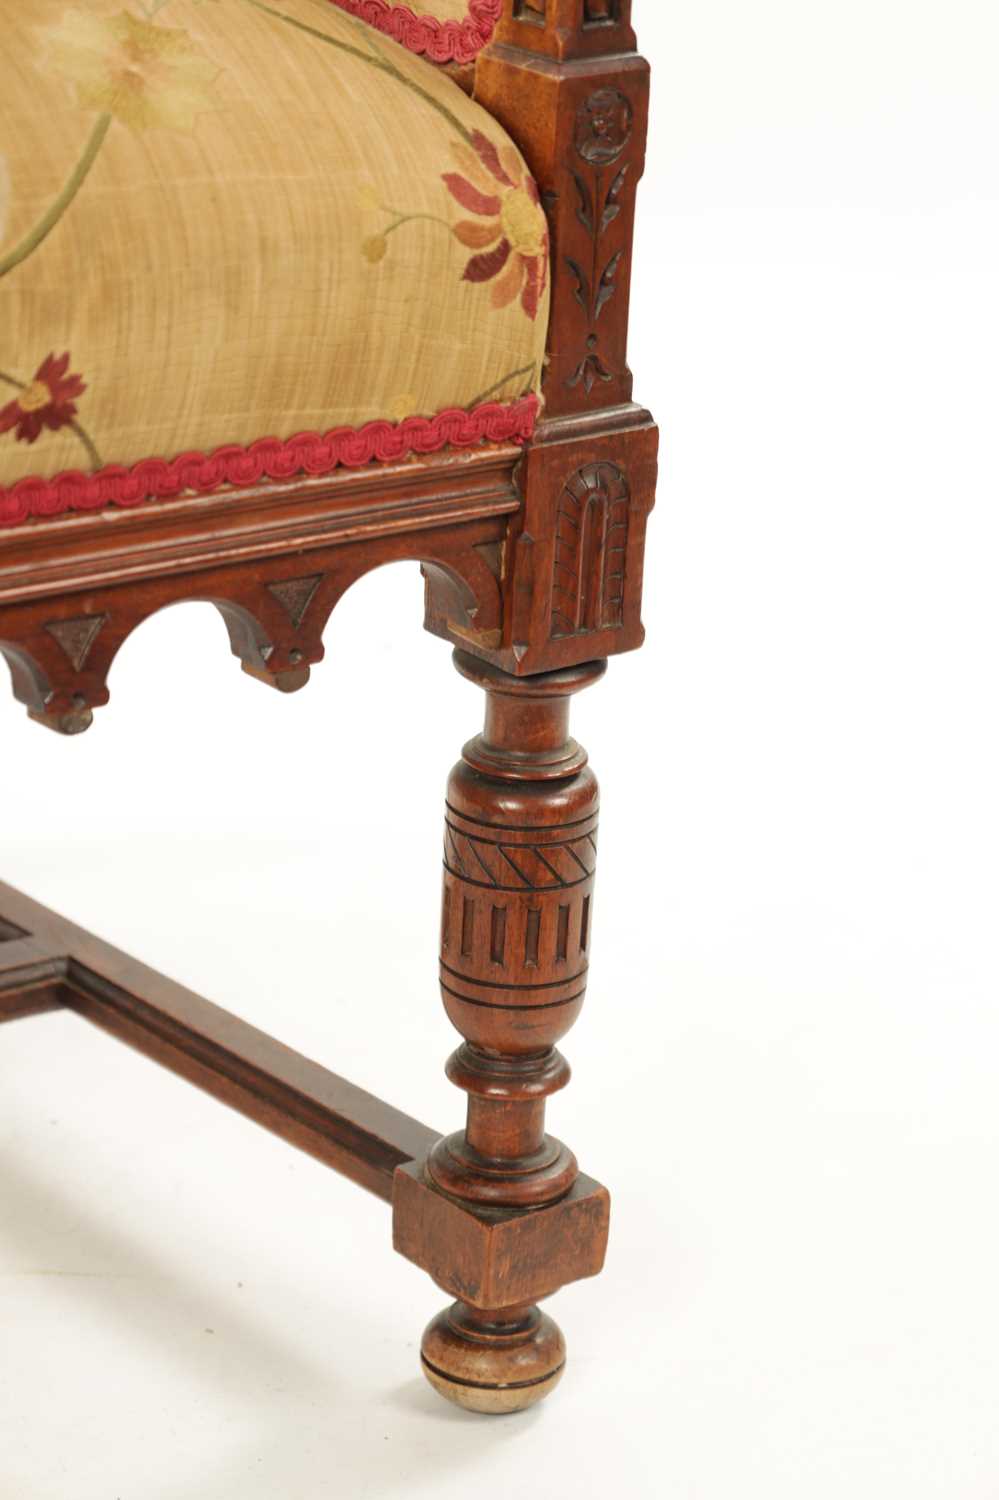 A FINE LATE 19TH CENTURY INLAID WALNUT AESTHETIC PERIOD CHAIR IN THE MANNER WILLIAM MORRIS - Image 3 of 7